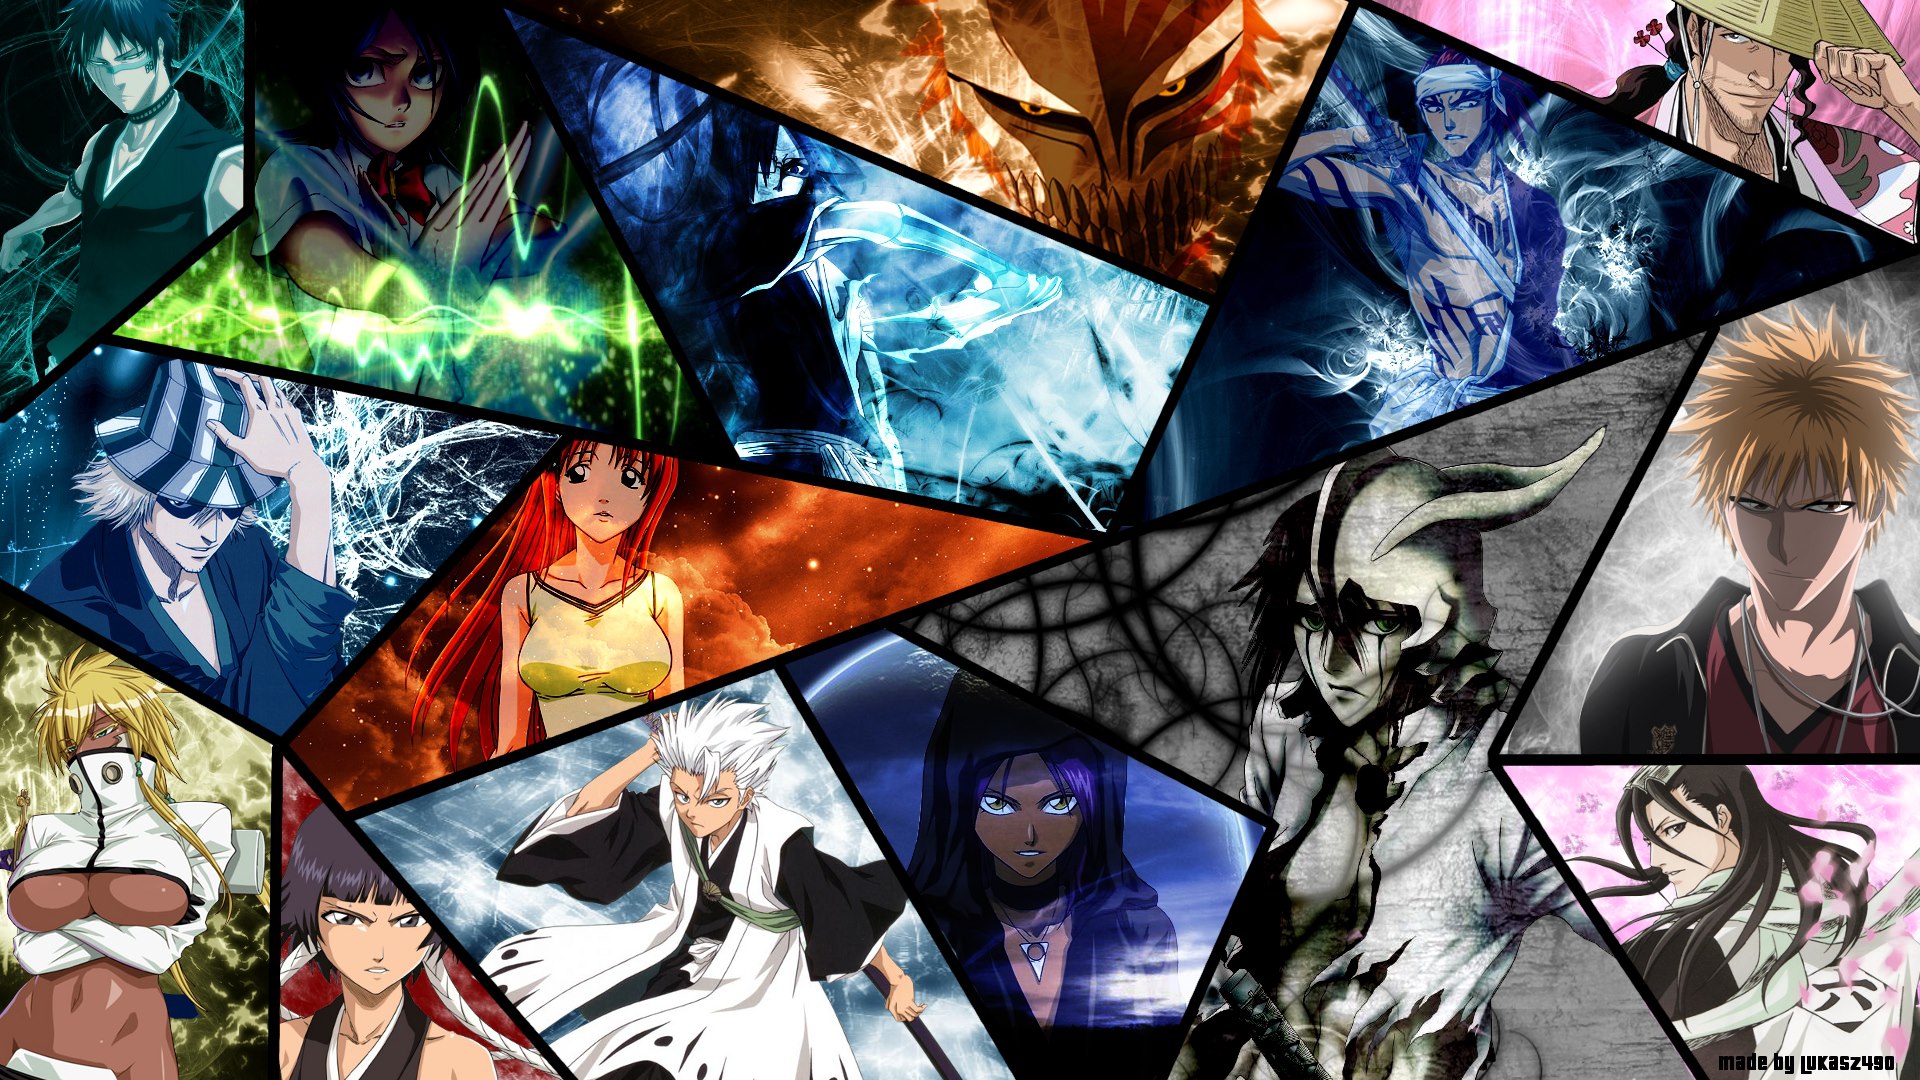 Free Download Bleach Anime Images Bleach Wallpapers Wallpaper Photos 19x1080 For Your Desktop Mobile Tablet Explore 76 Bleach Wallpapers Hd Anime Wallpapers Bleach Wallpaper For Desktop Anime Bleach Wallpaper